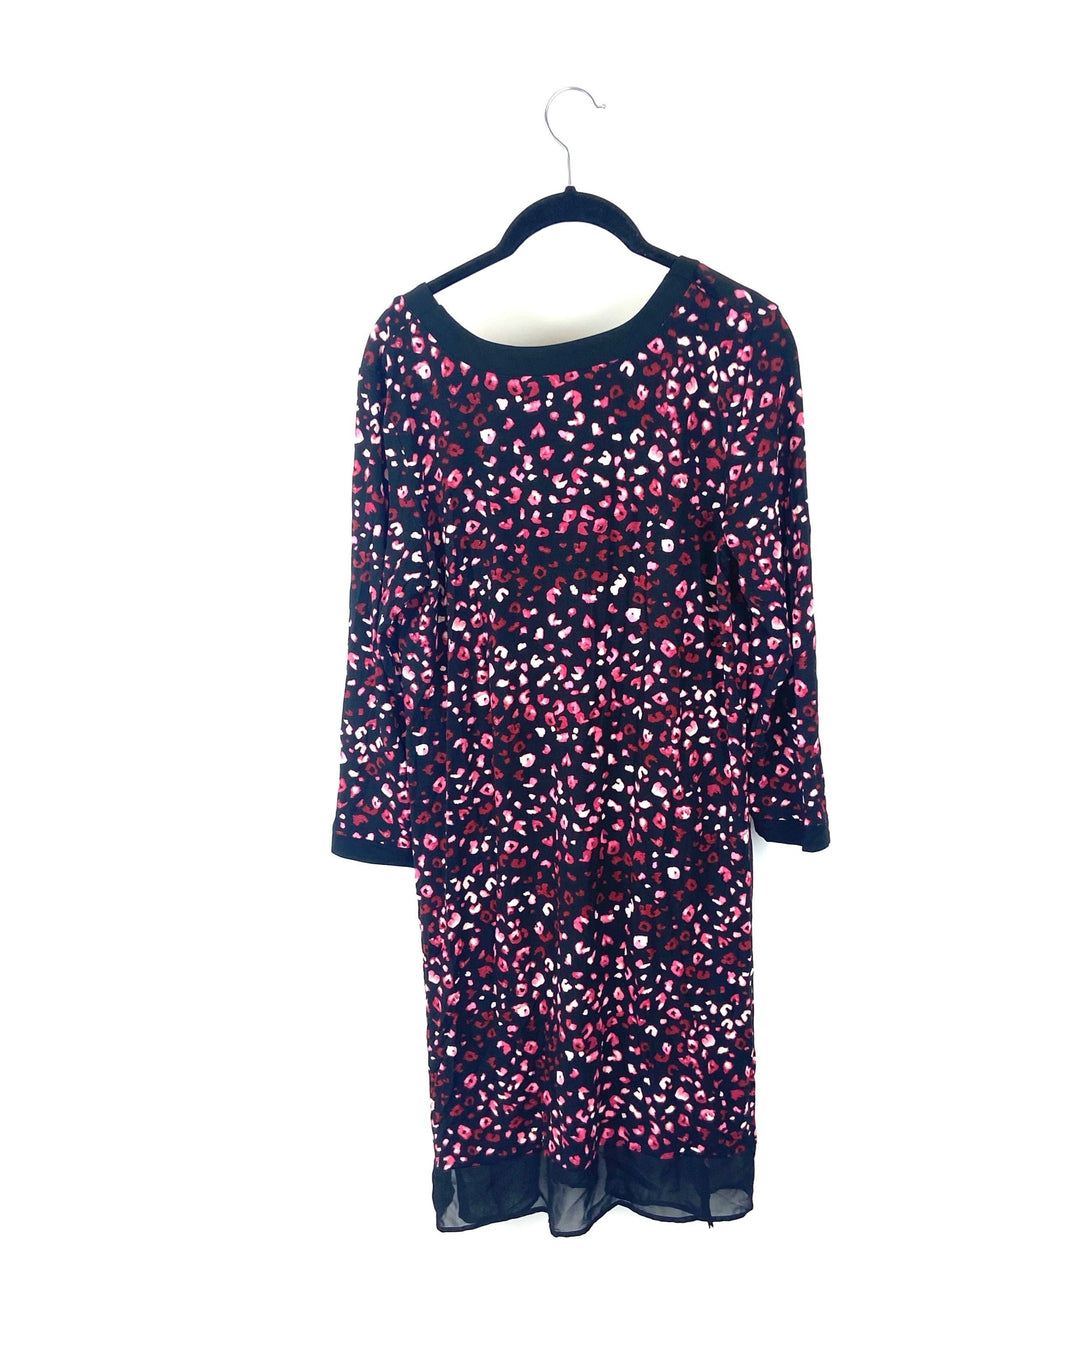 Black and Red Printed Nightgown - Small